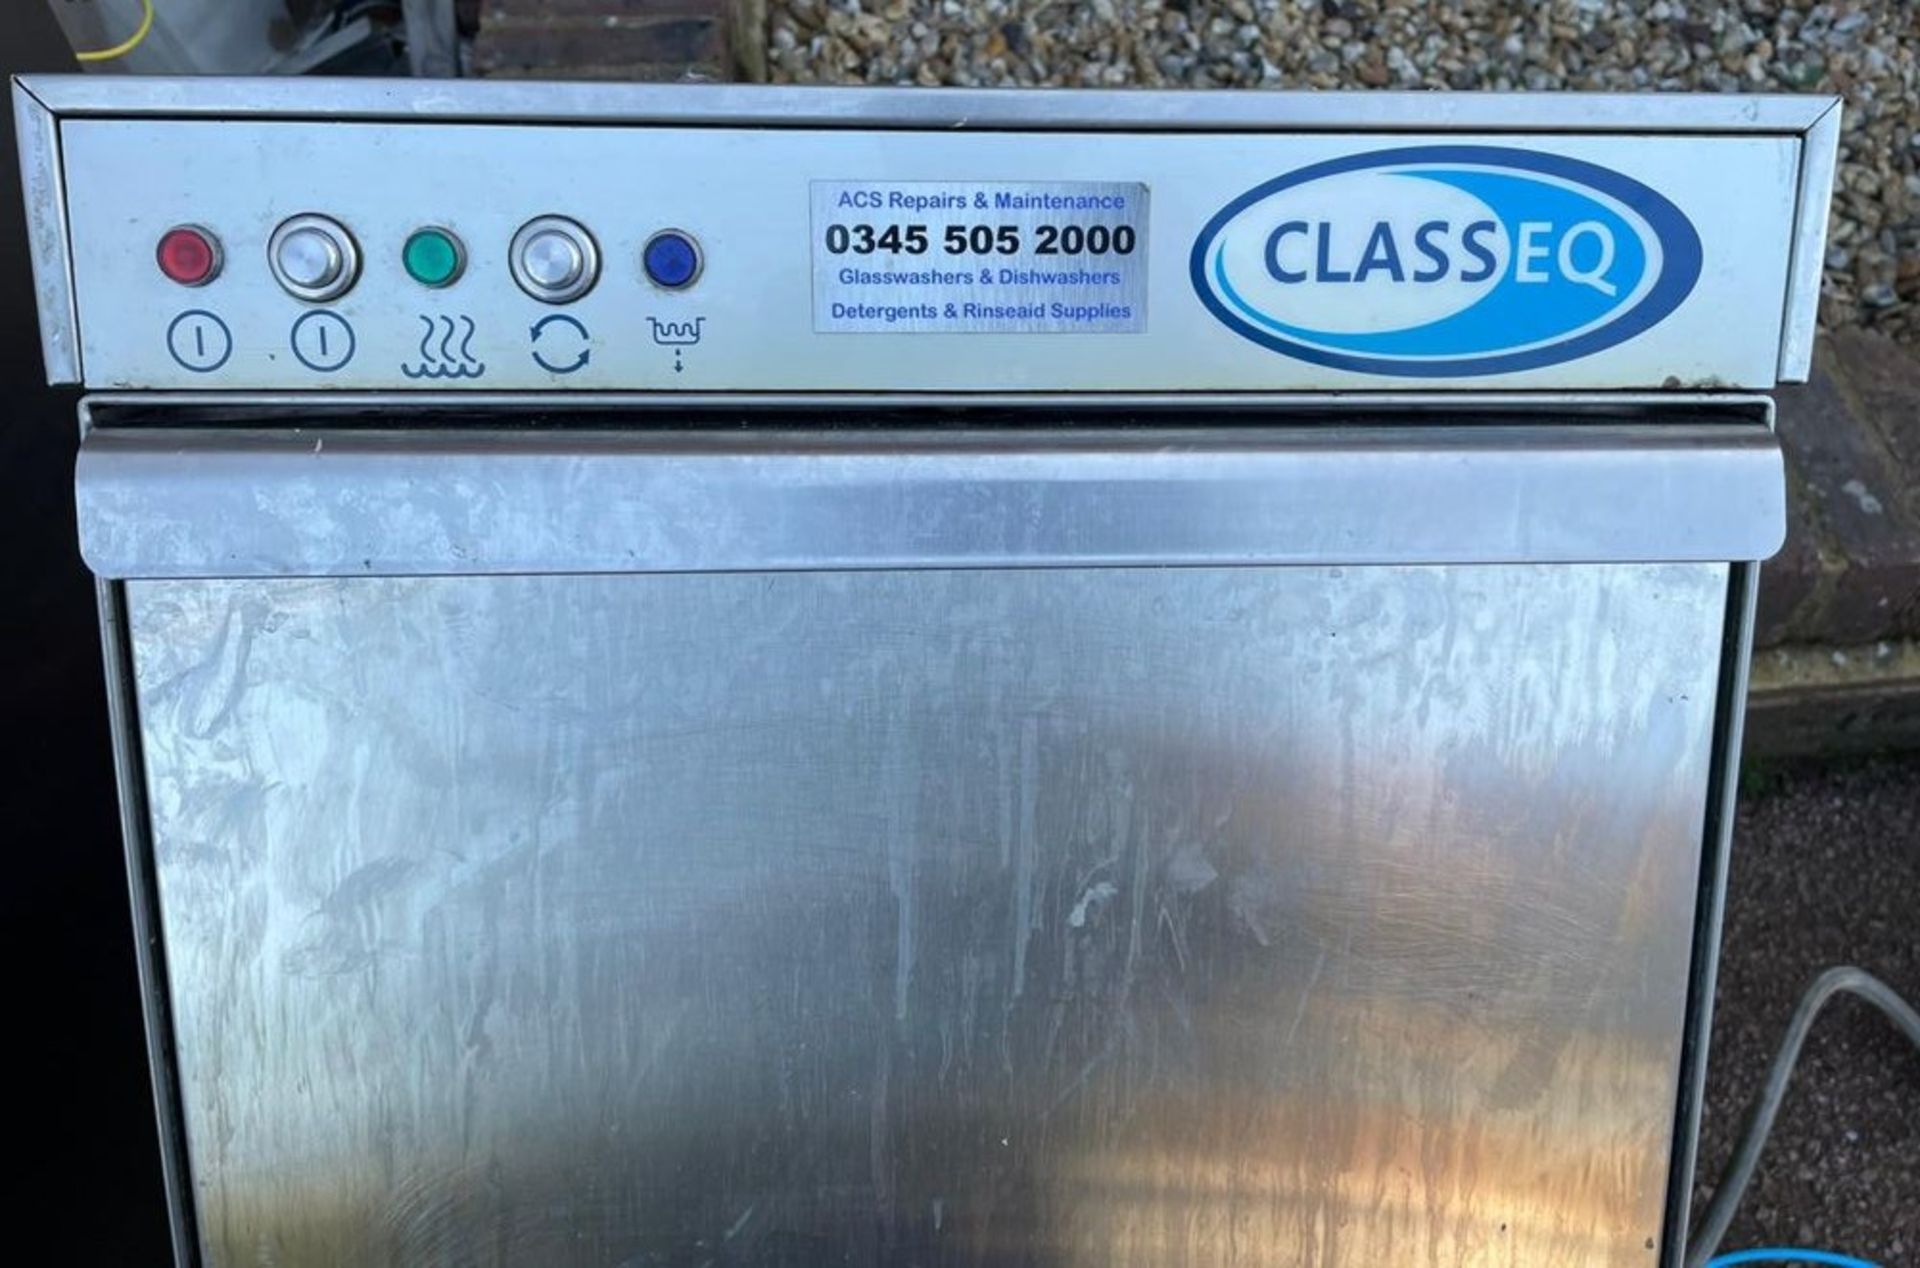 1 x Class EQ Undercounter Glass Washer - CL667 - Location: Brighton, Sussex, BN24 Collections:This - Image 2 of 2